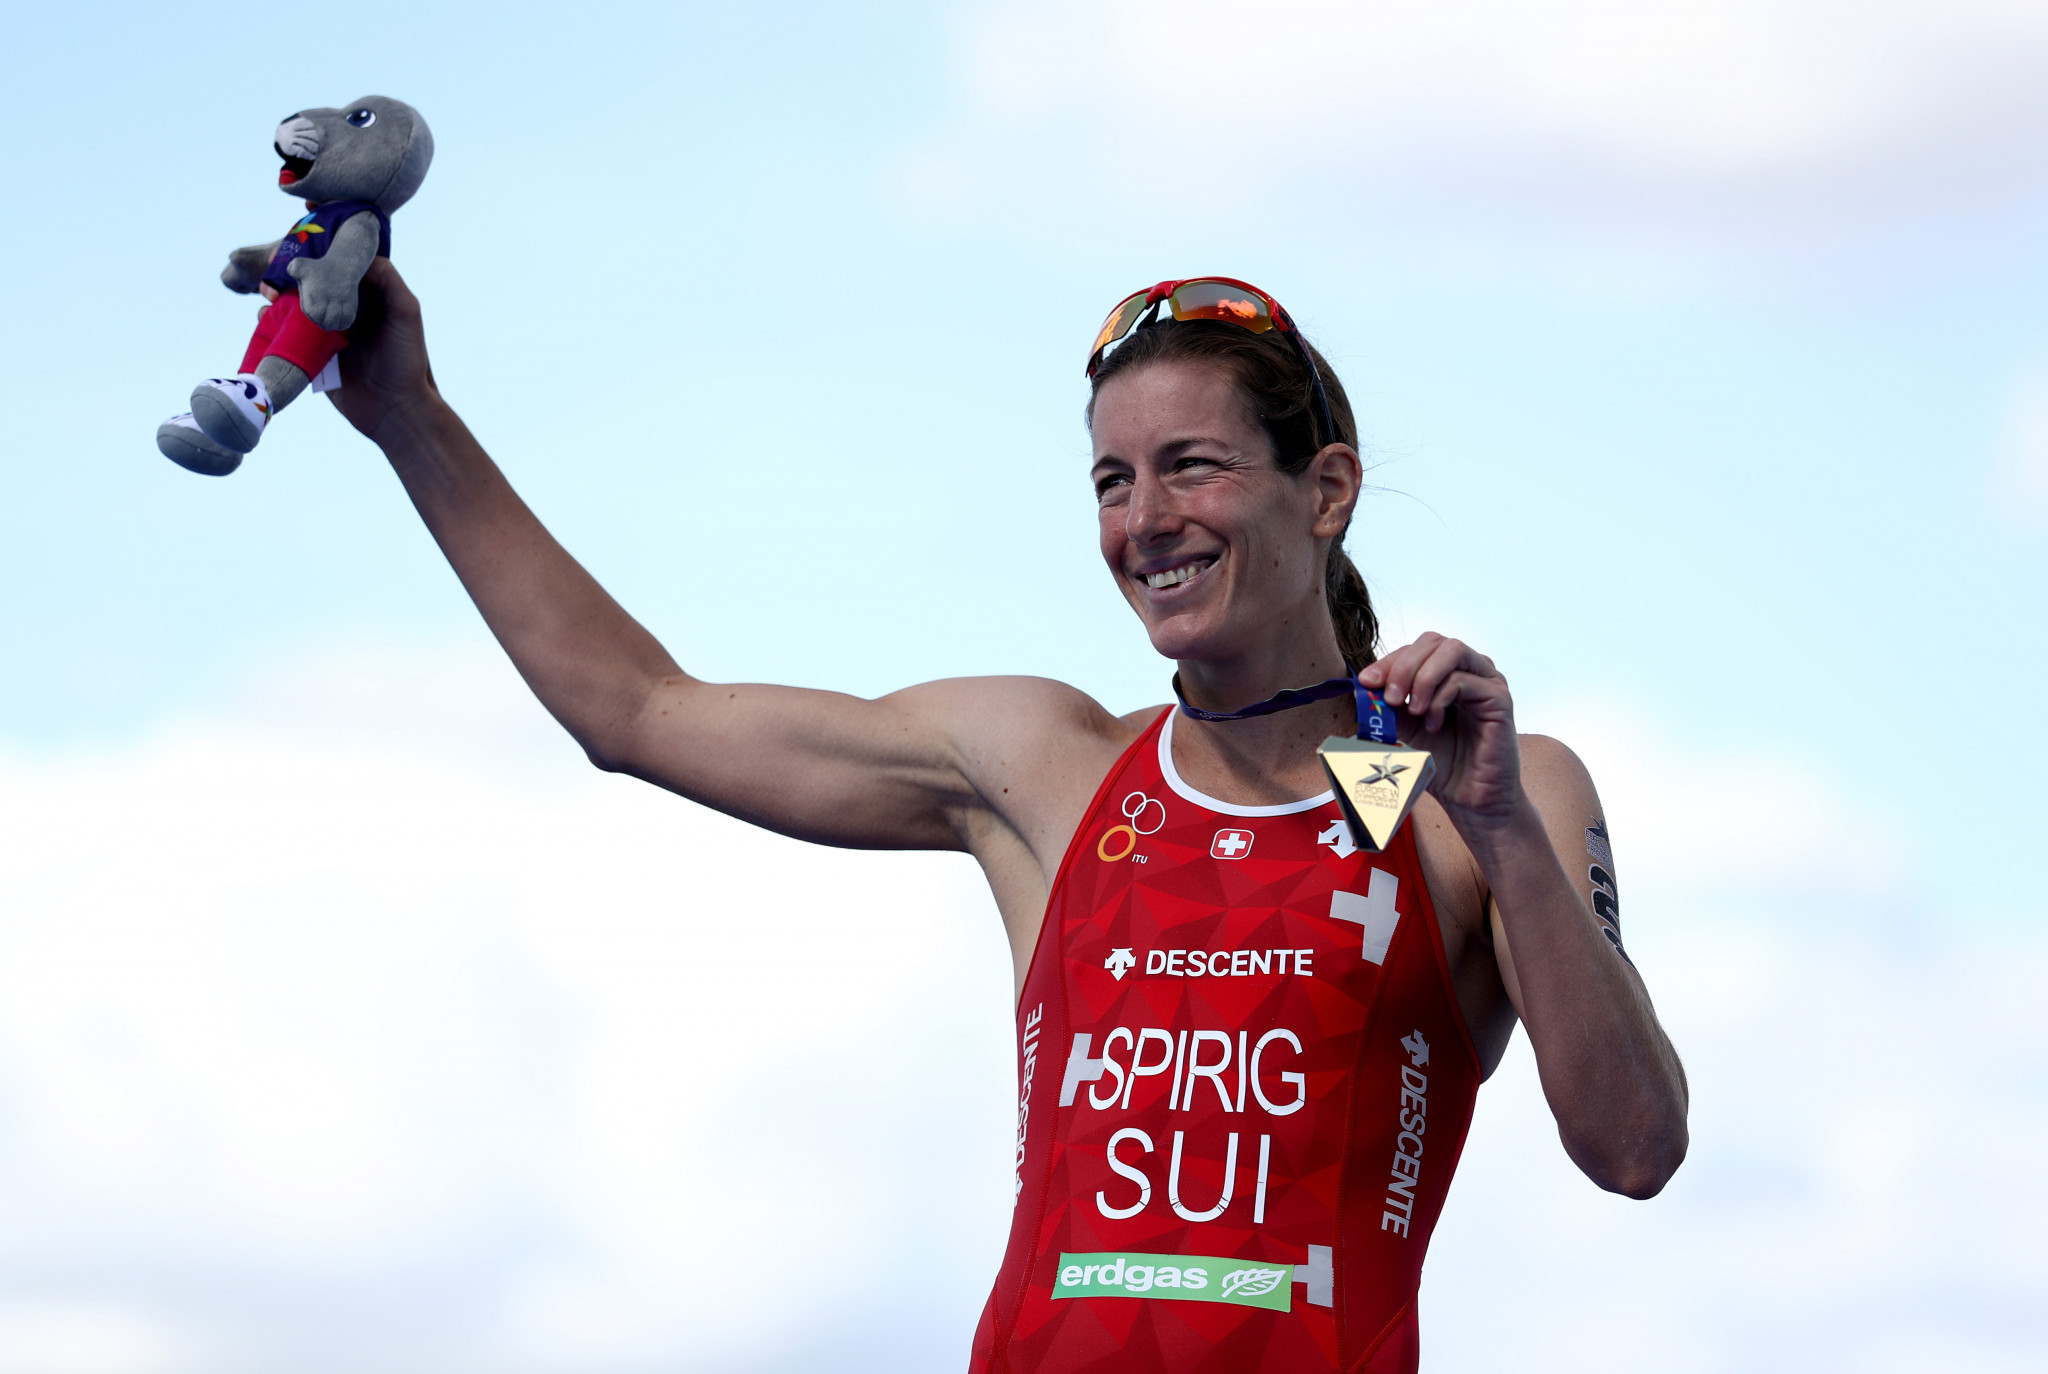 Switzerland's Spirig claims first triathlon gold medal of 2018 European Championships as swimming action concludes